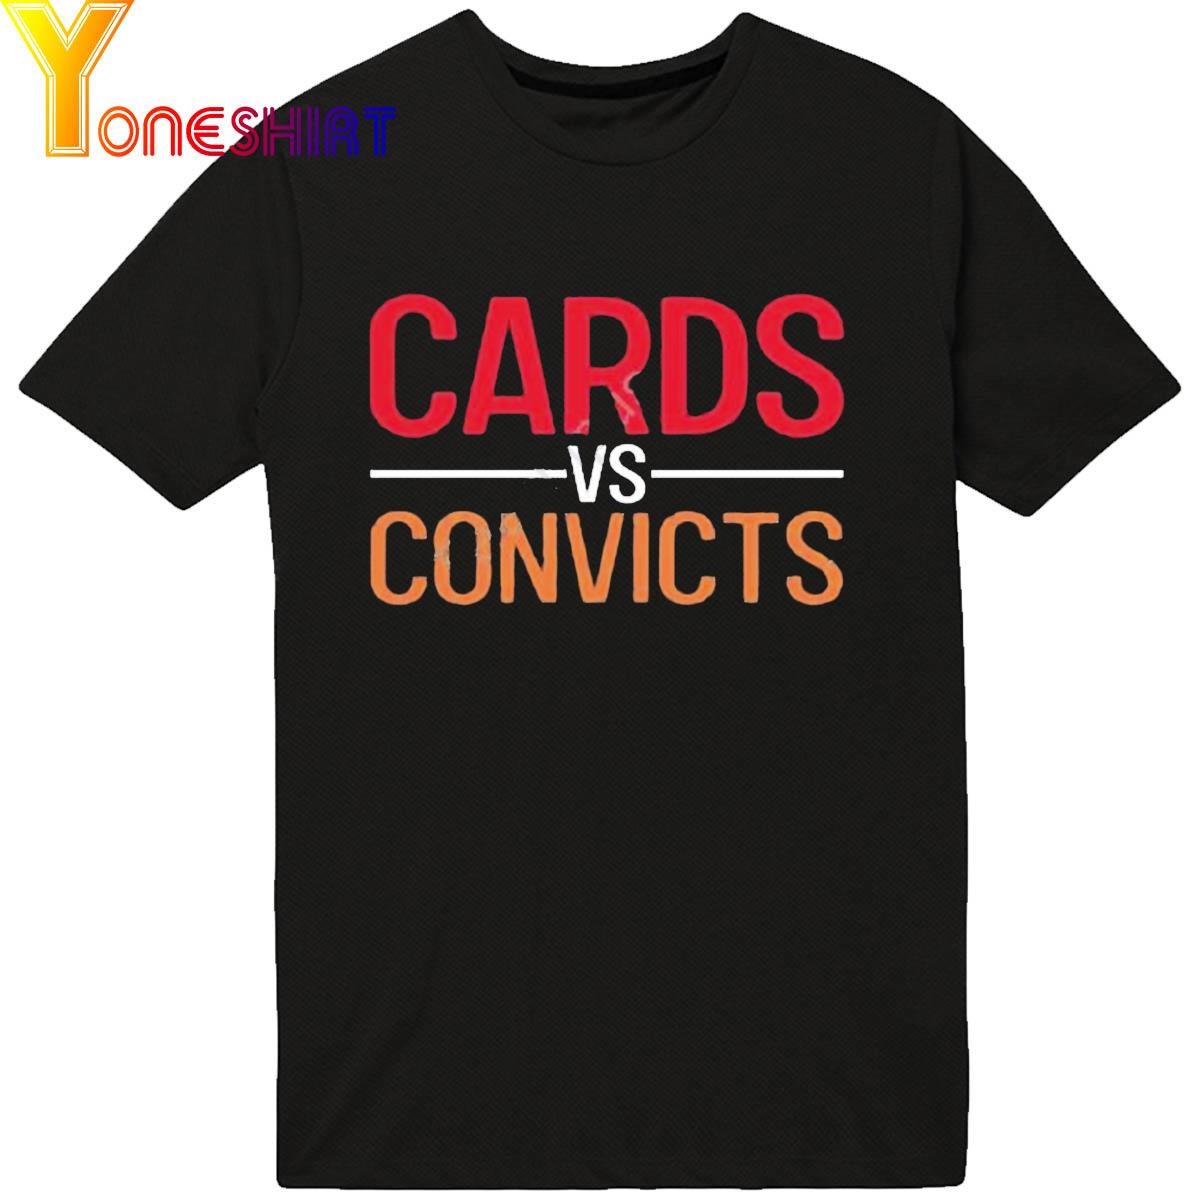 Cards Vs Convicts Shirt